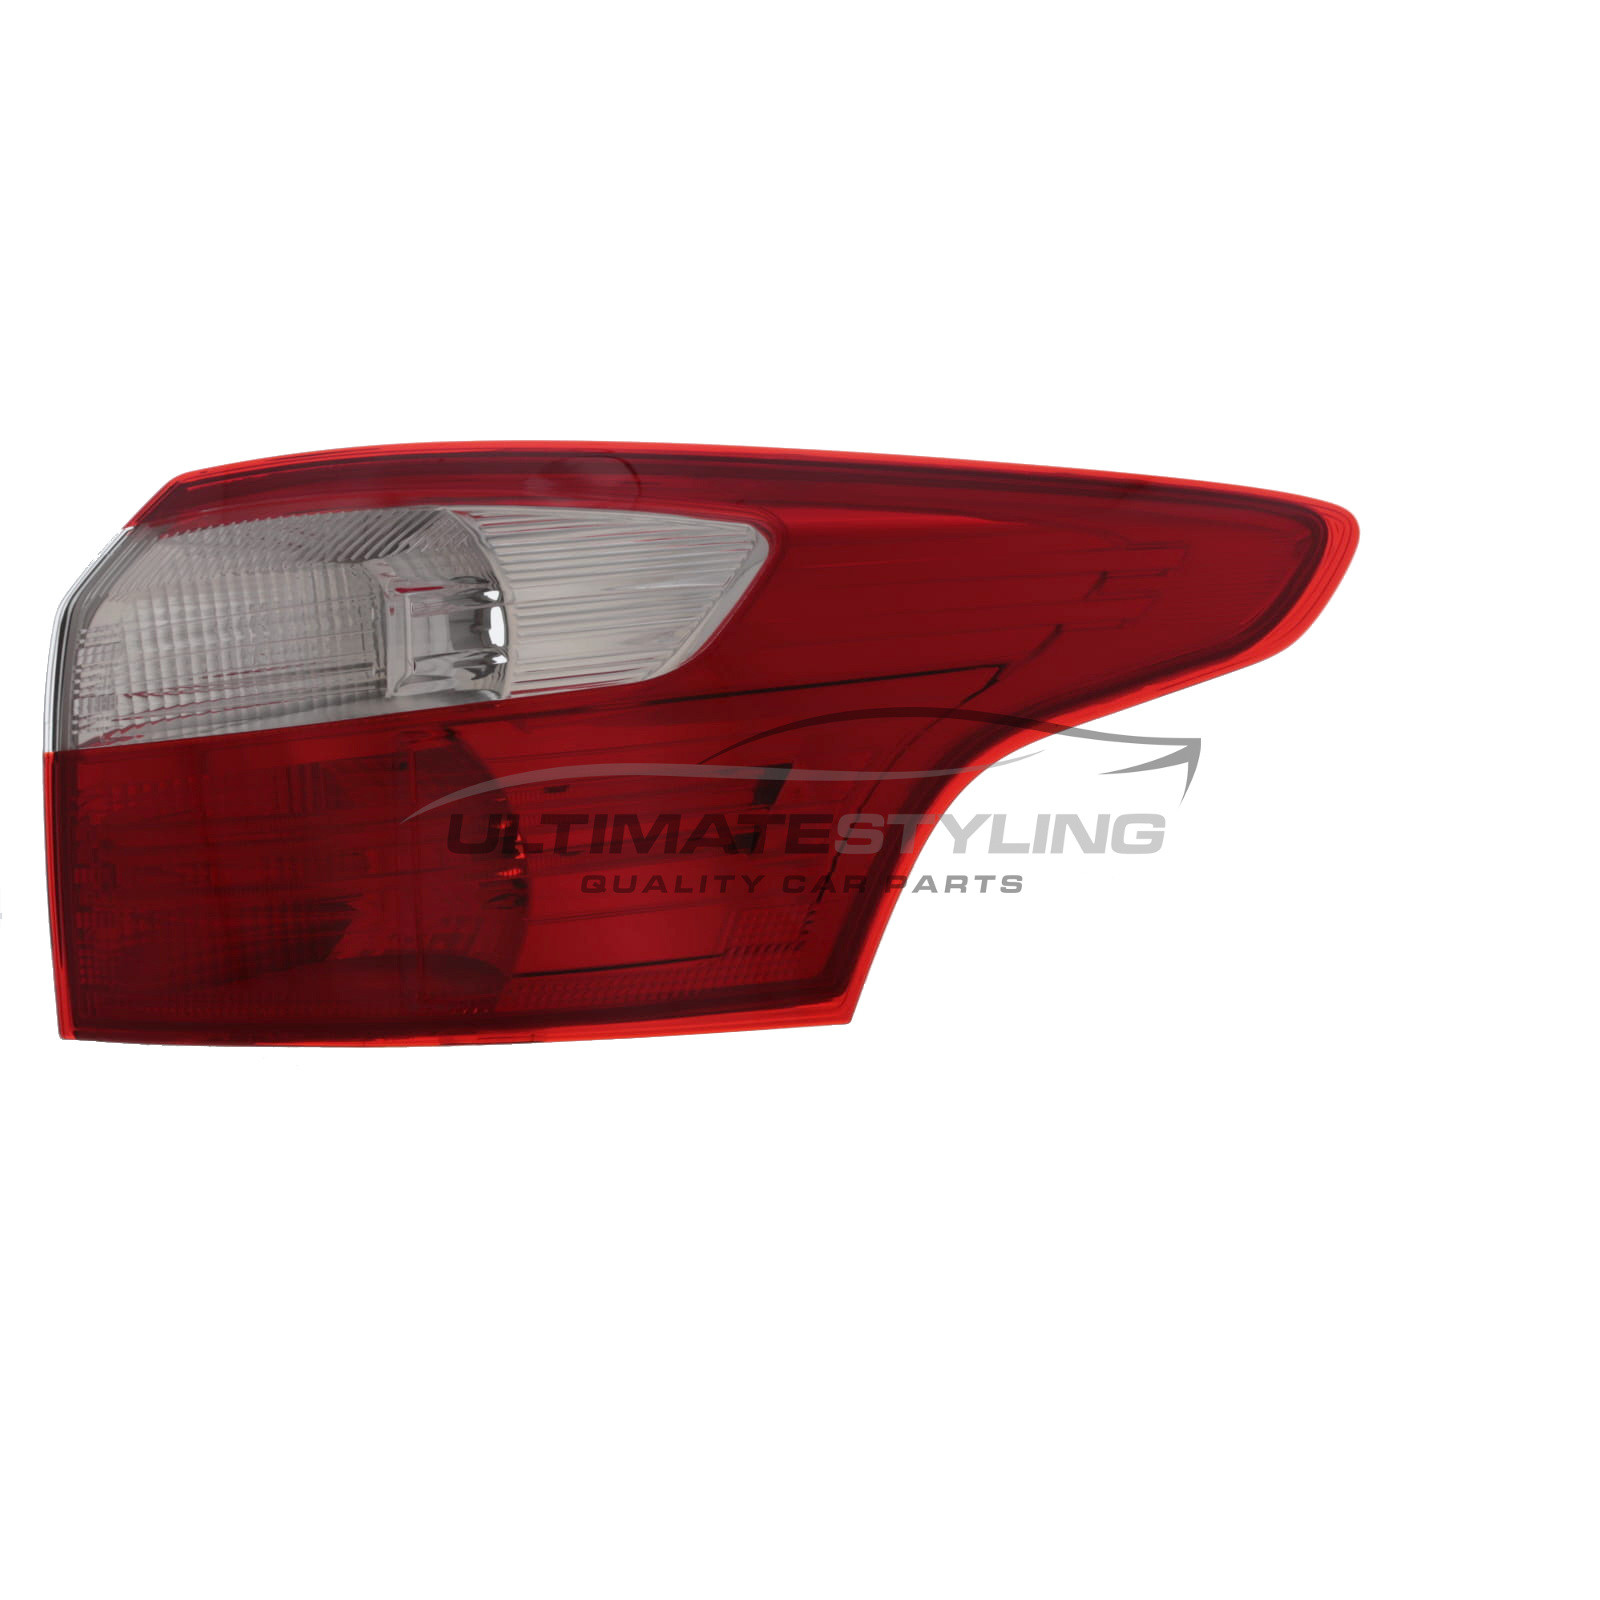 Ford Focus Rear Light / Tail Light - Drivers Side (RH), Rear Outer (Wing) - LED